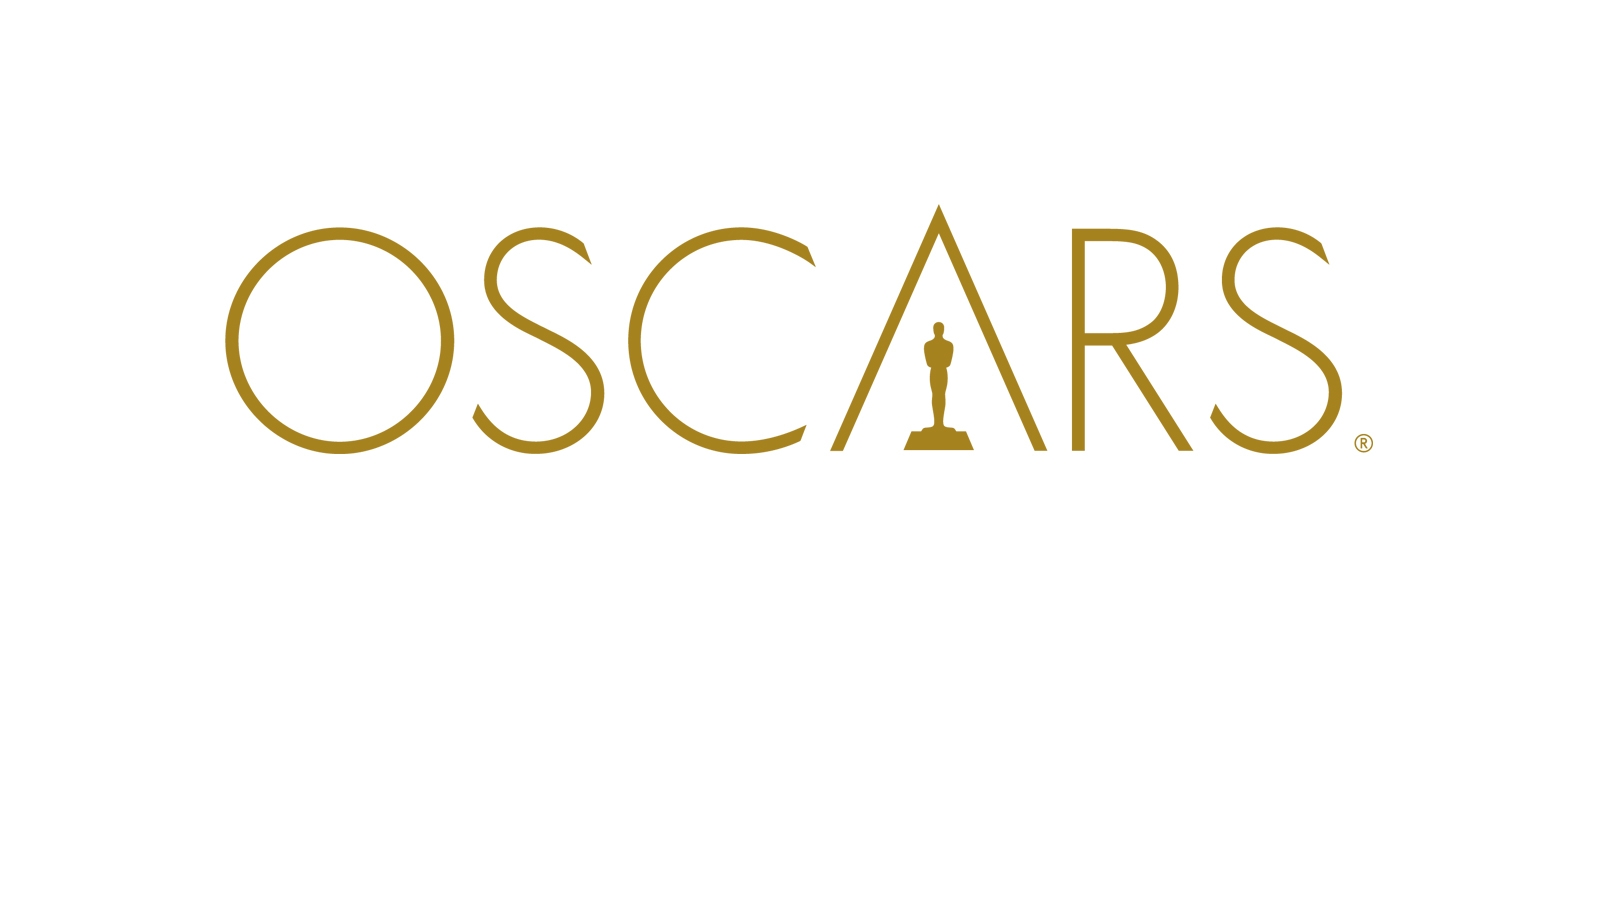 The 87th Annual Academy Awards: Over 100 Alumni Associated with Nominated Projects - Hero image 